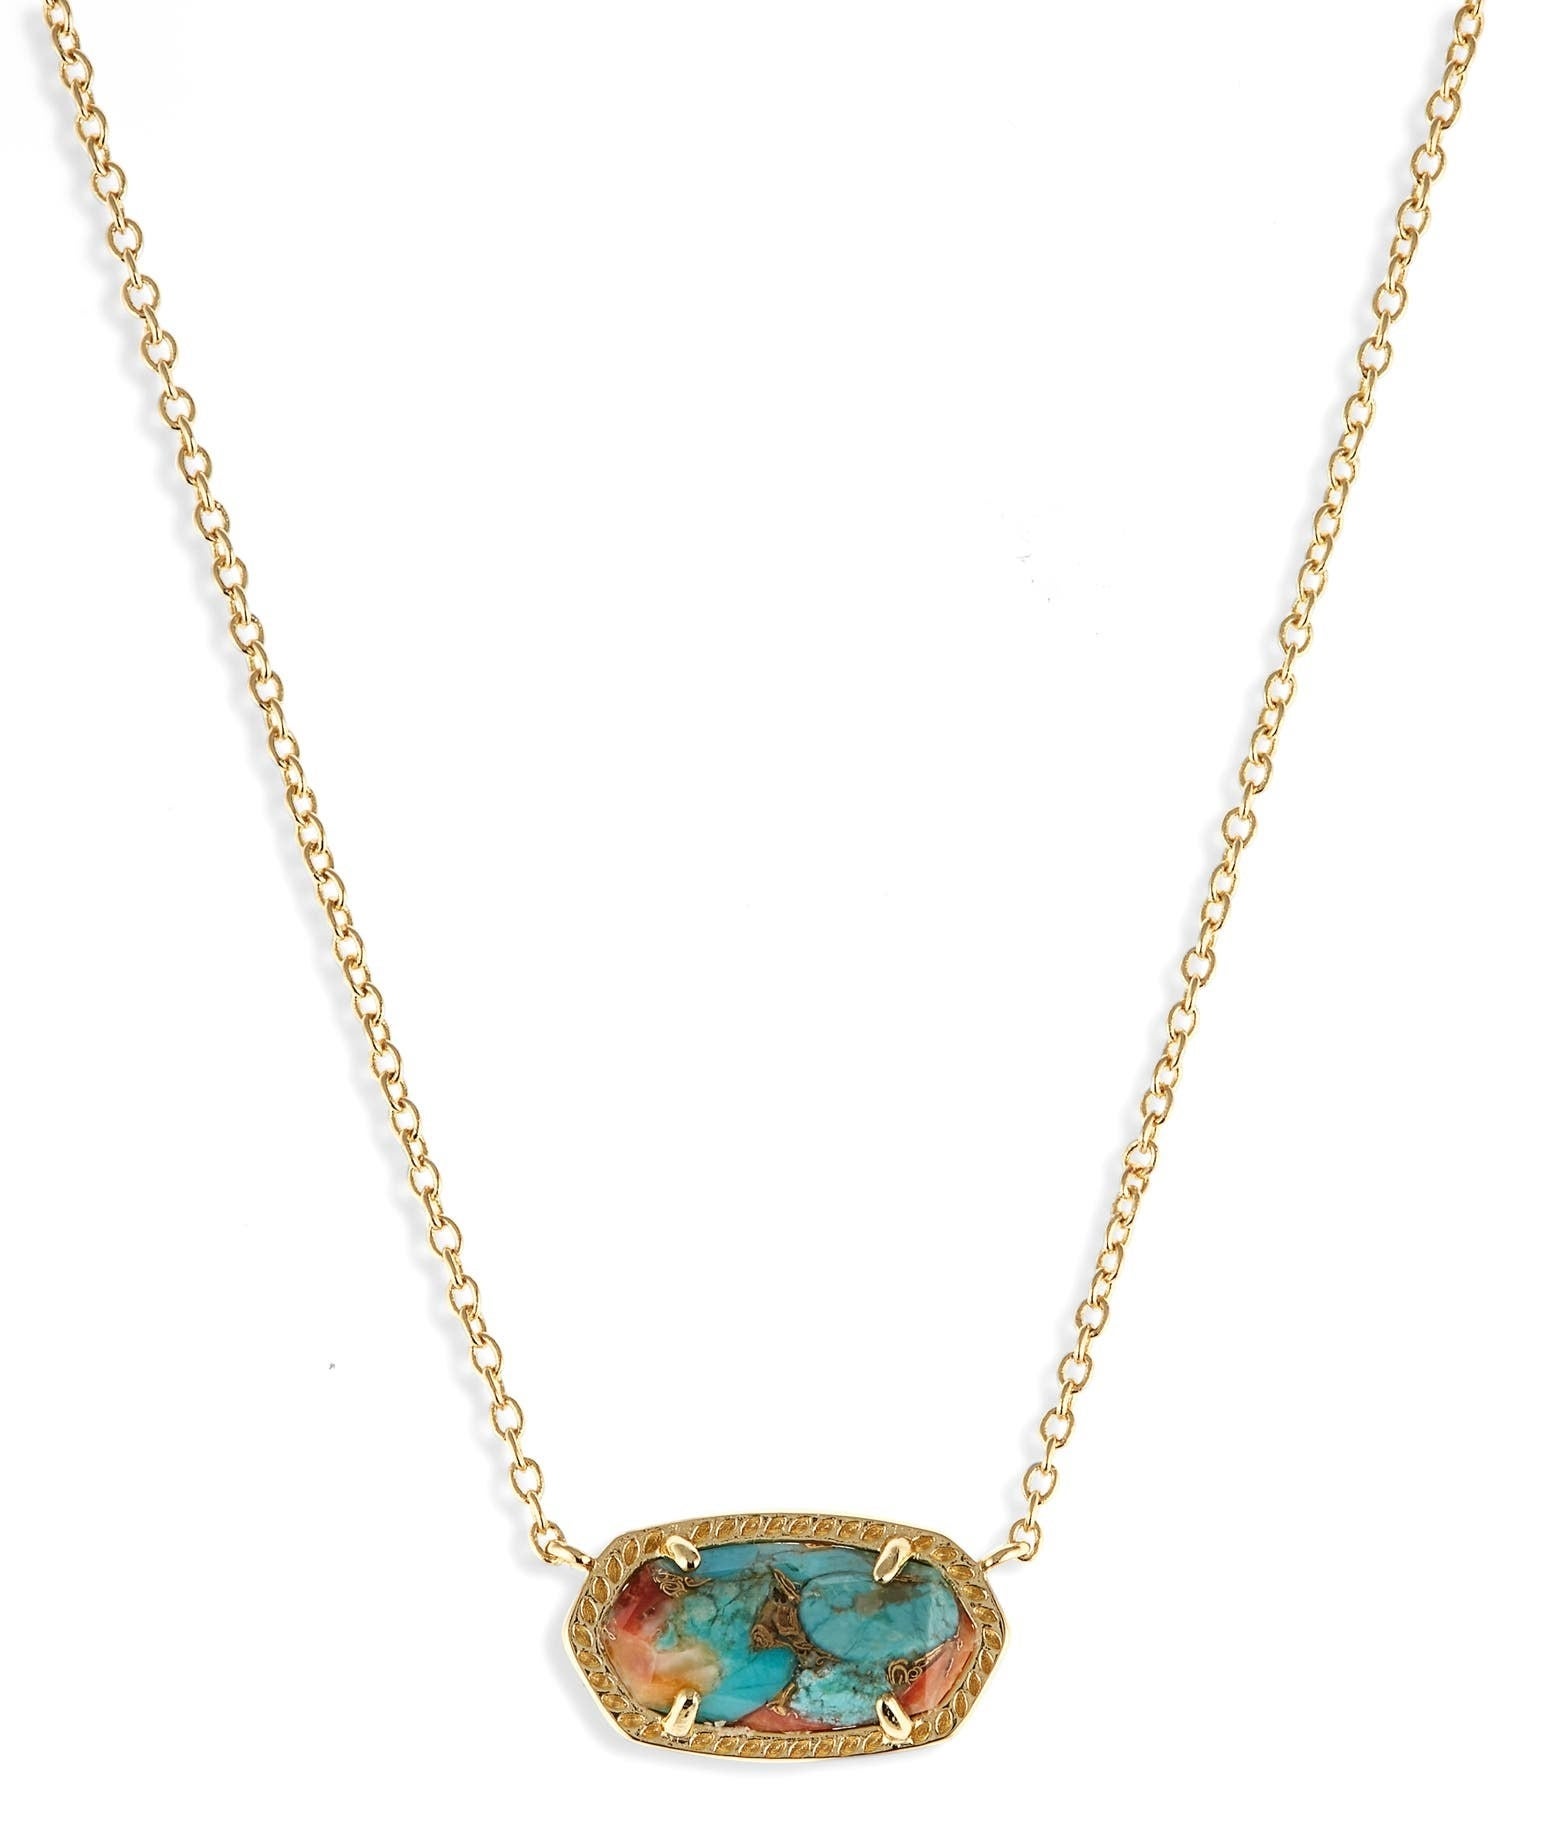 A close up image of the necklace with a turquoise and red pendant and gold chain